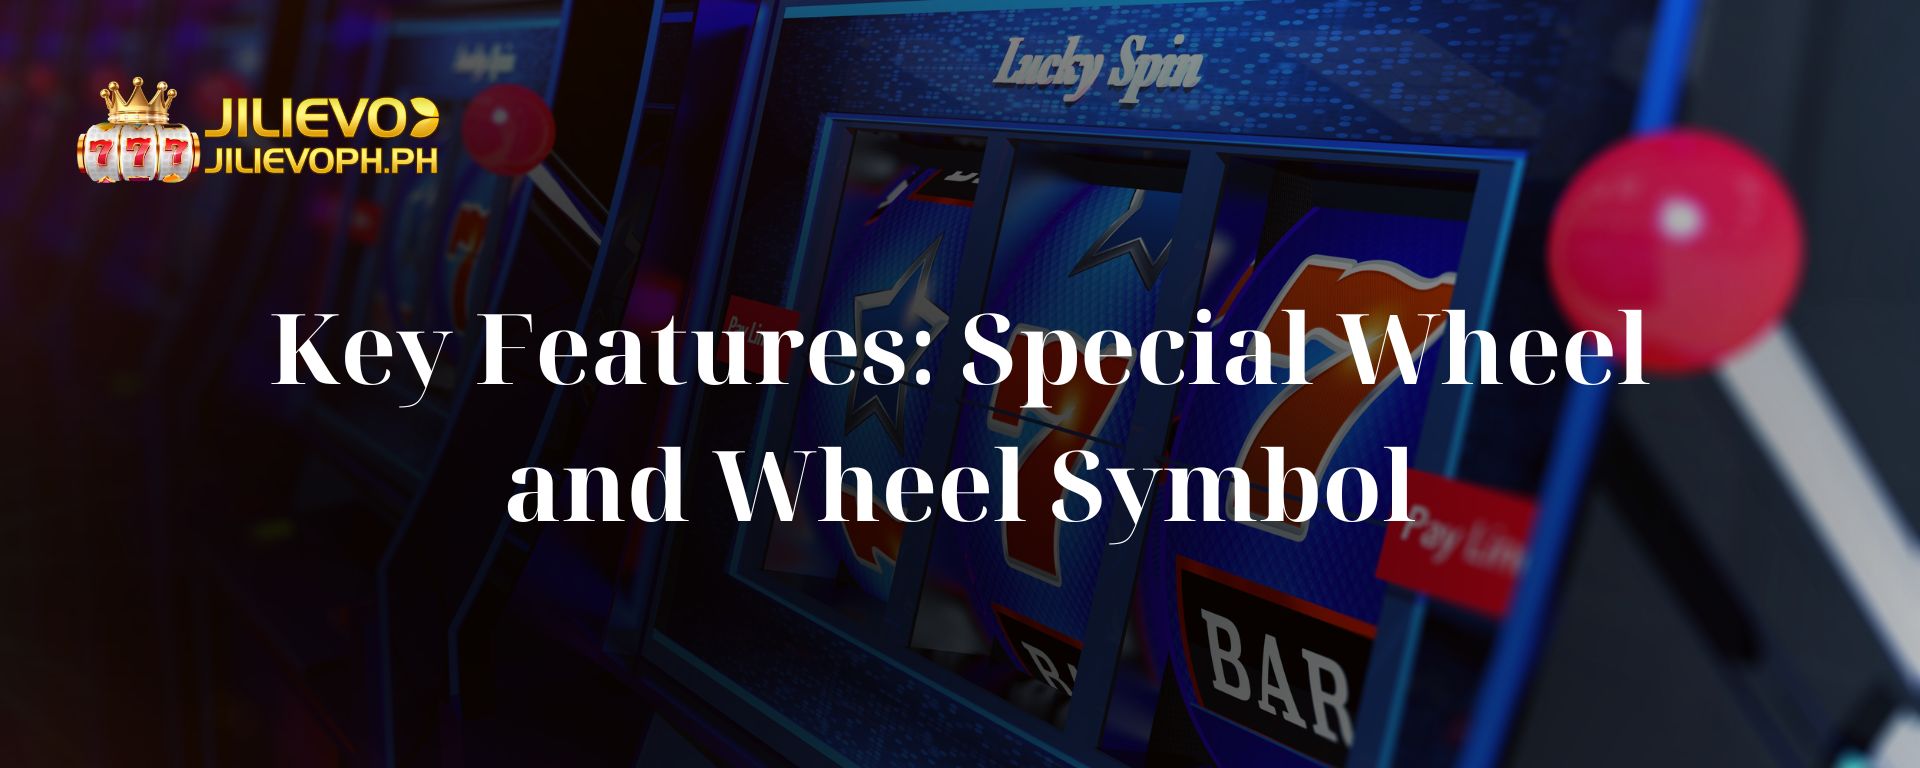 Key Features: Special Wheel and Wheel Symbol